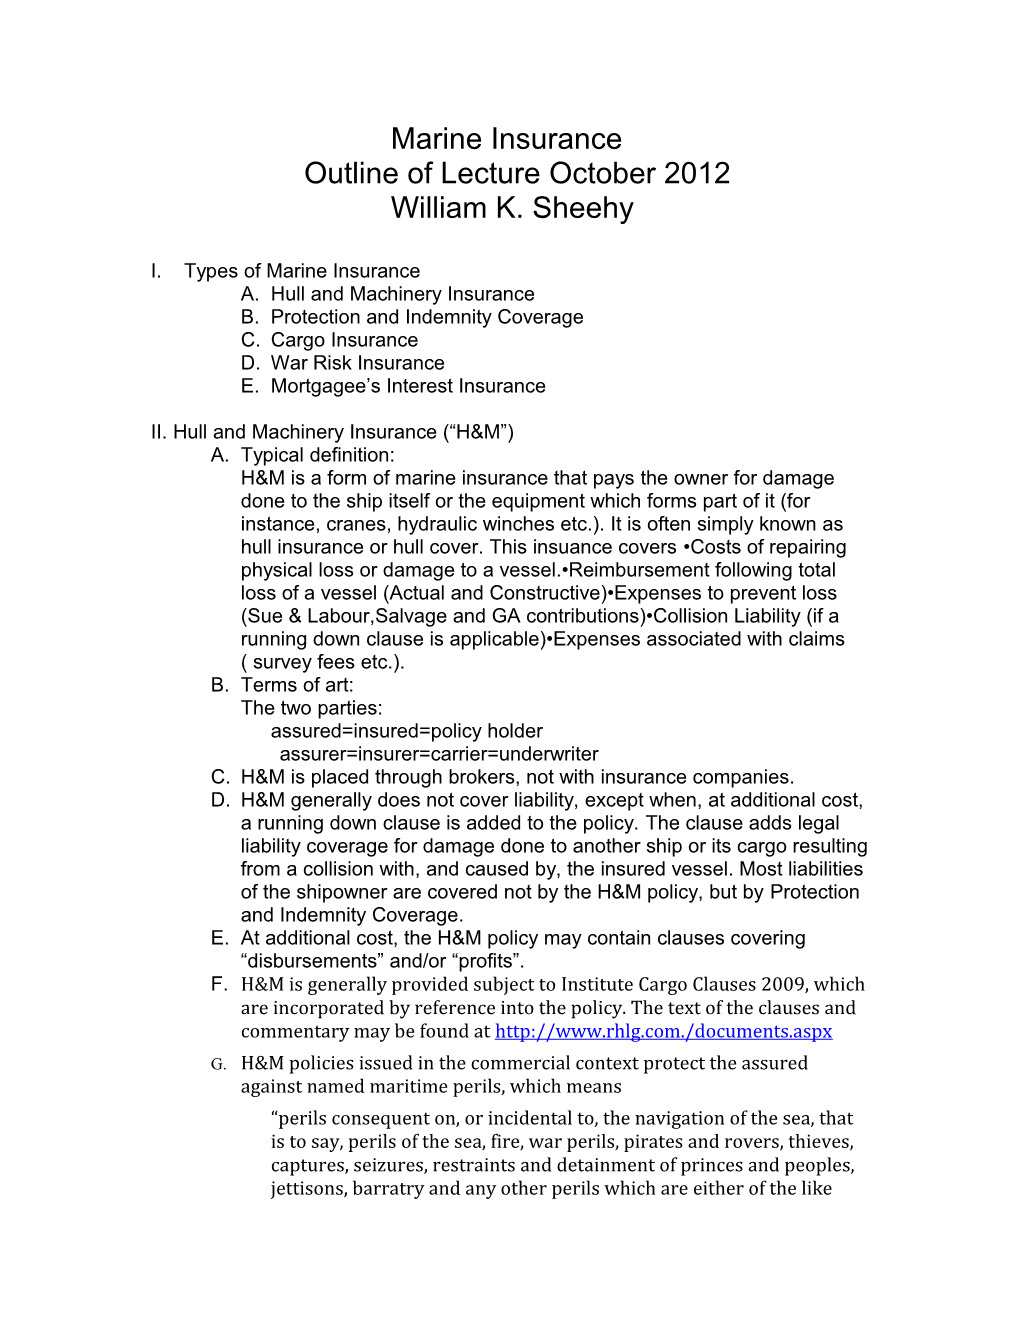 Outline of Lecture October 2012